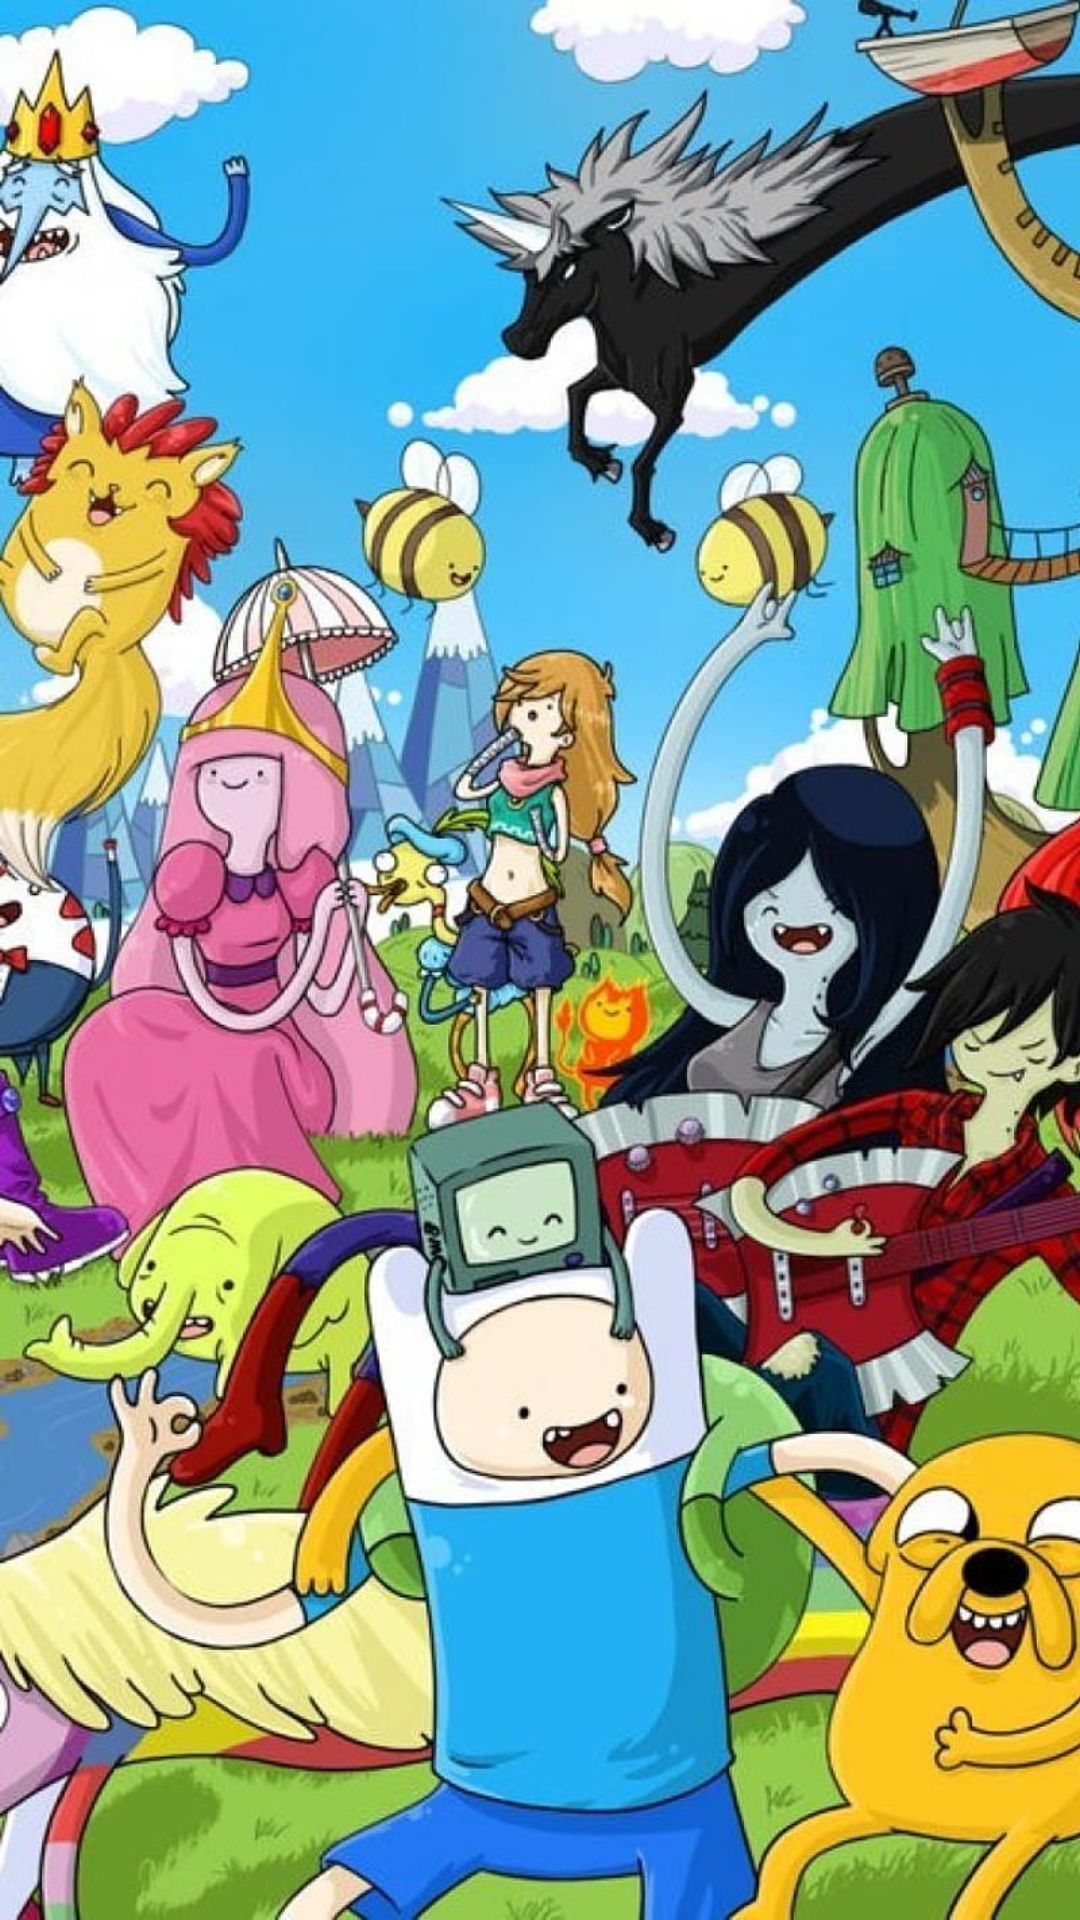 Adventure Time Wallpapers - Top 30 Best Adventure Time Wallpapers Download